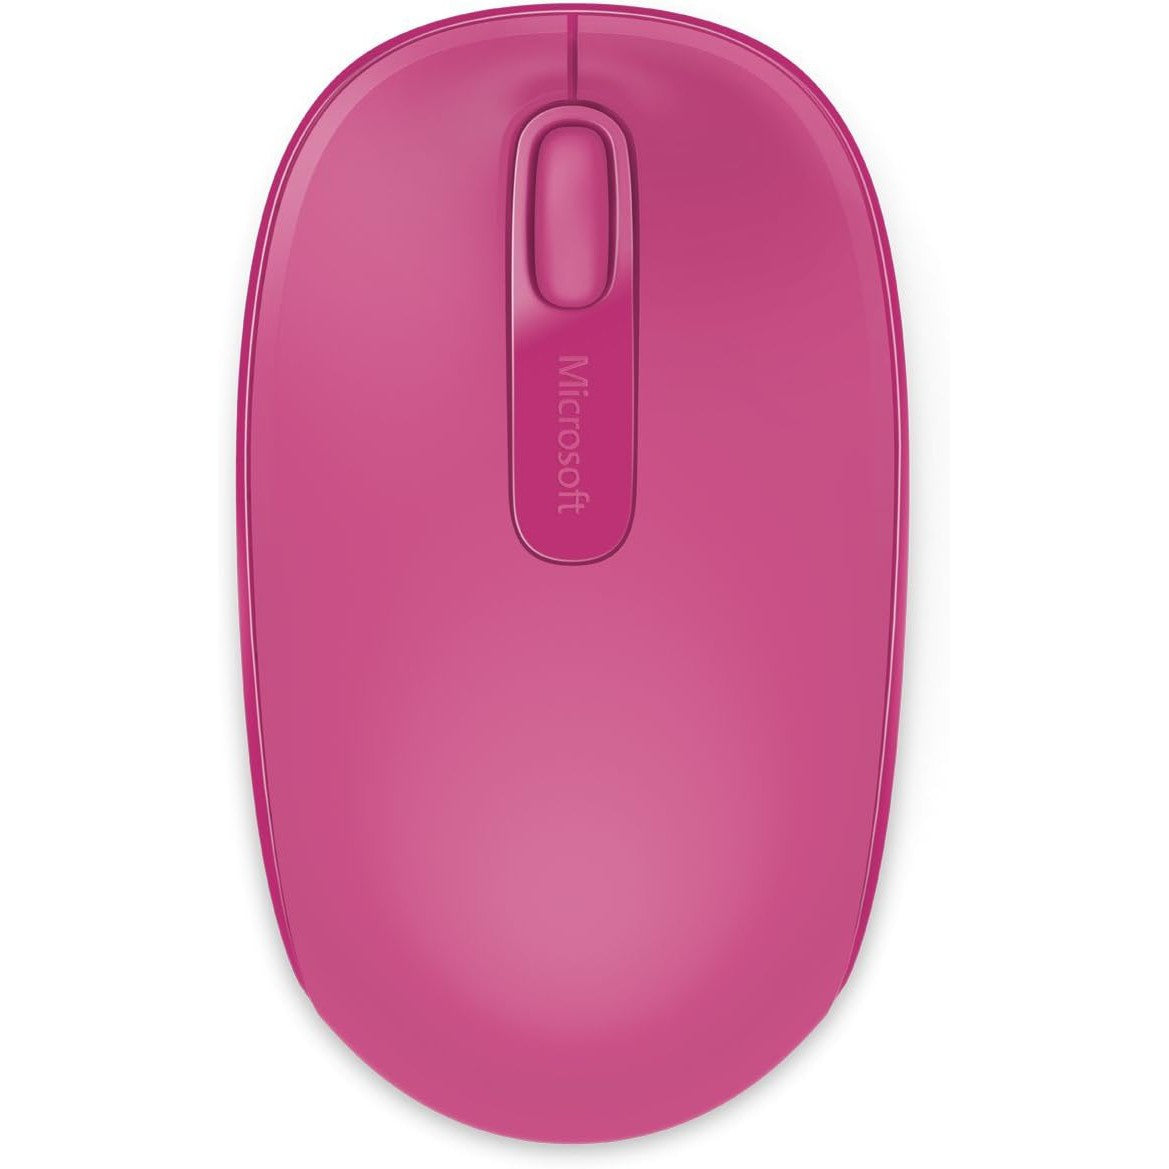 Microsoft Wireless Mobile Mouse 1850 - Pink - New